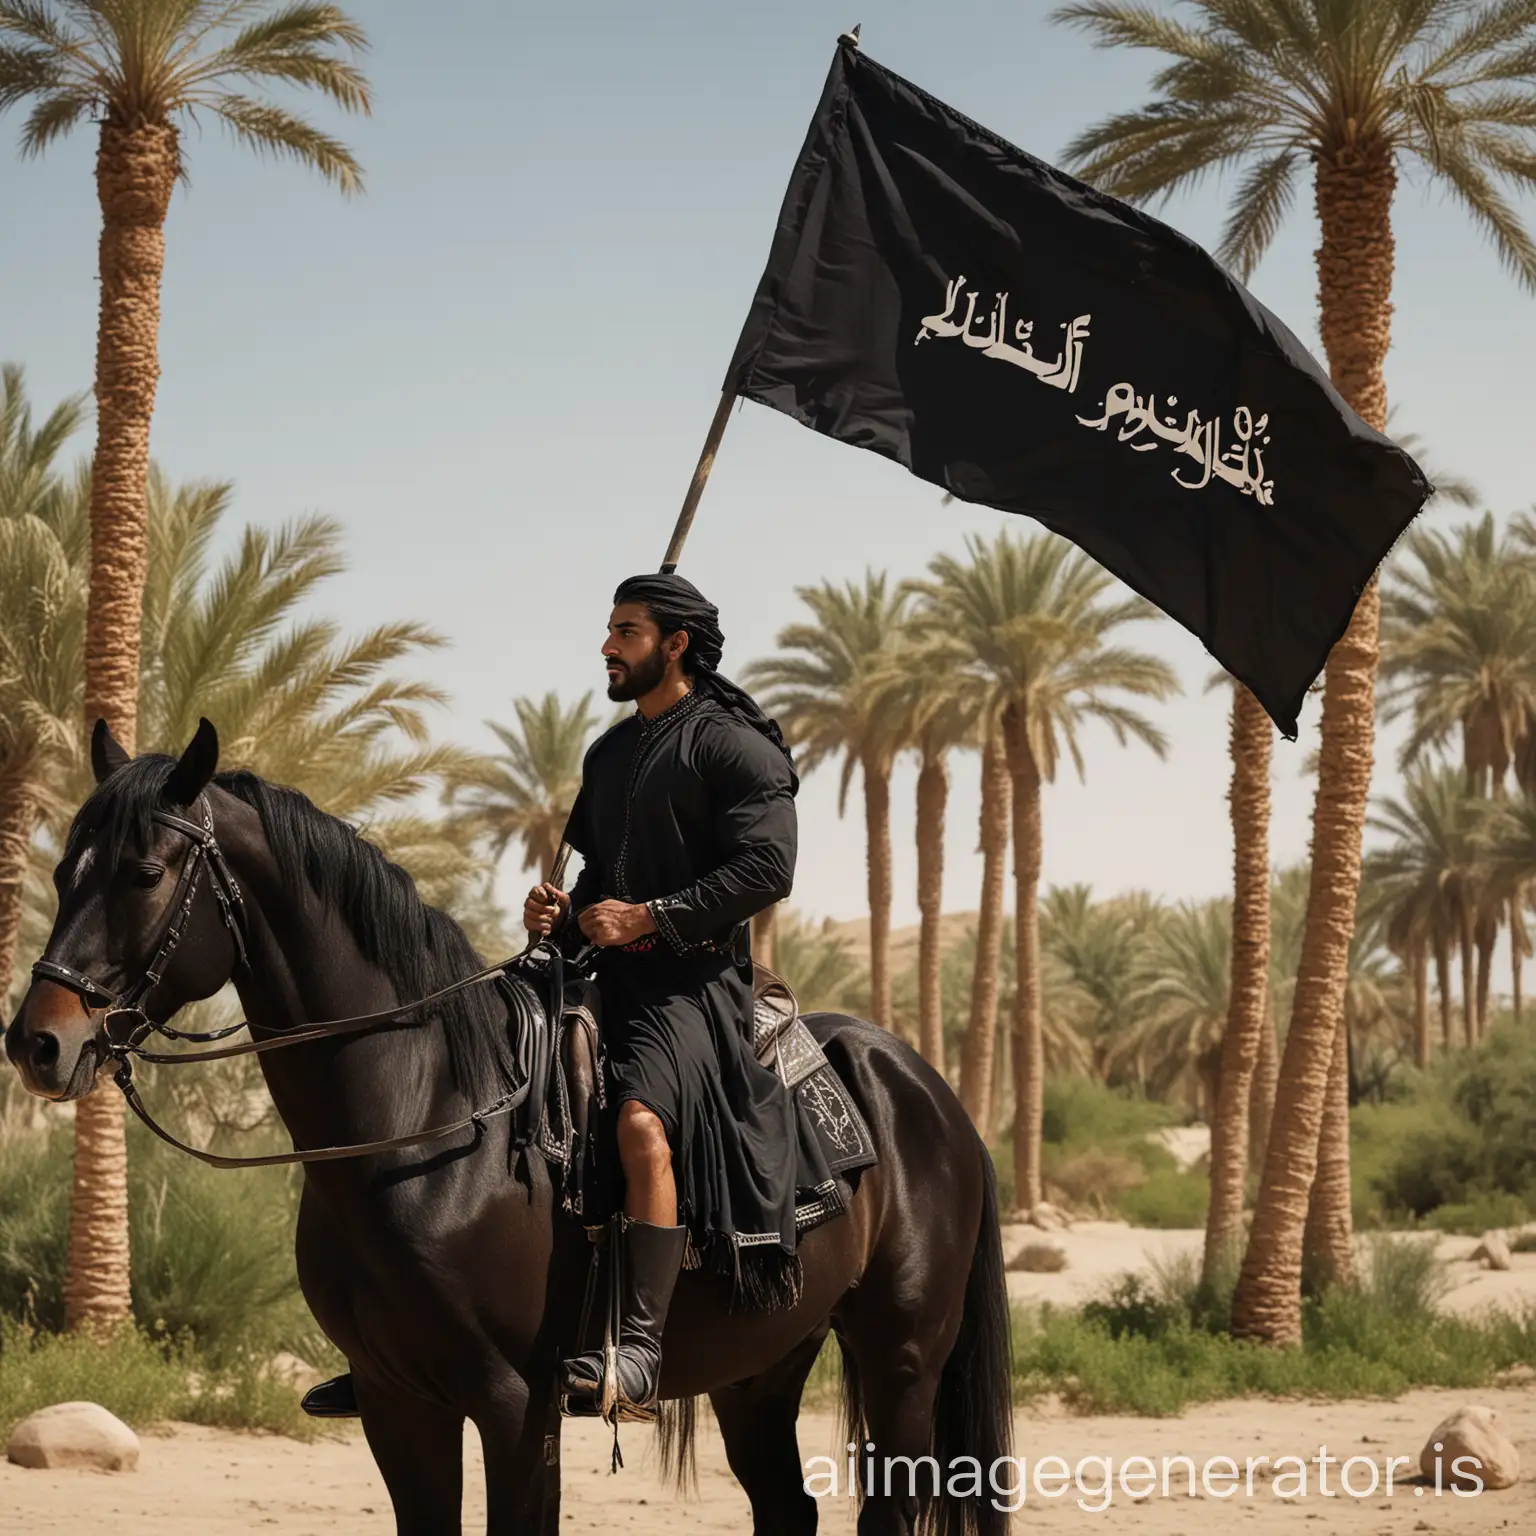 musculer man in arab black dress with shord and plain black flag in hand  on horse beside of an oasis